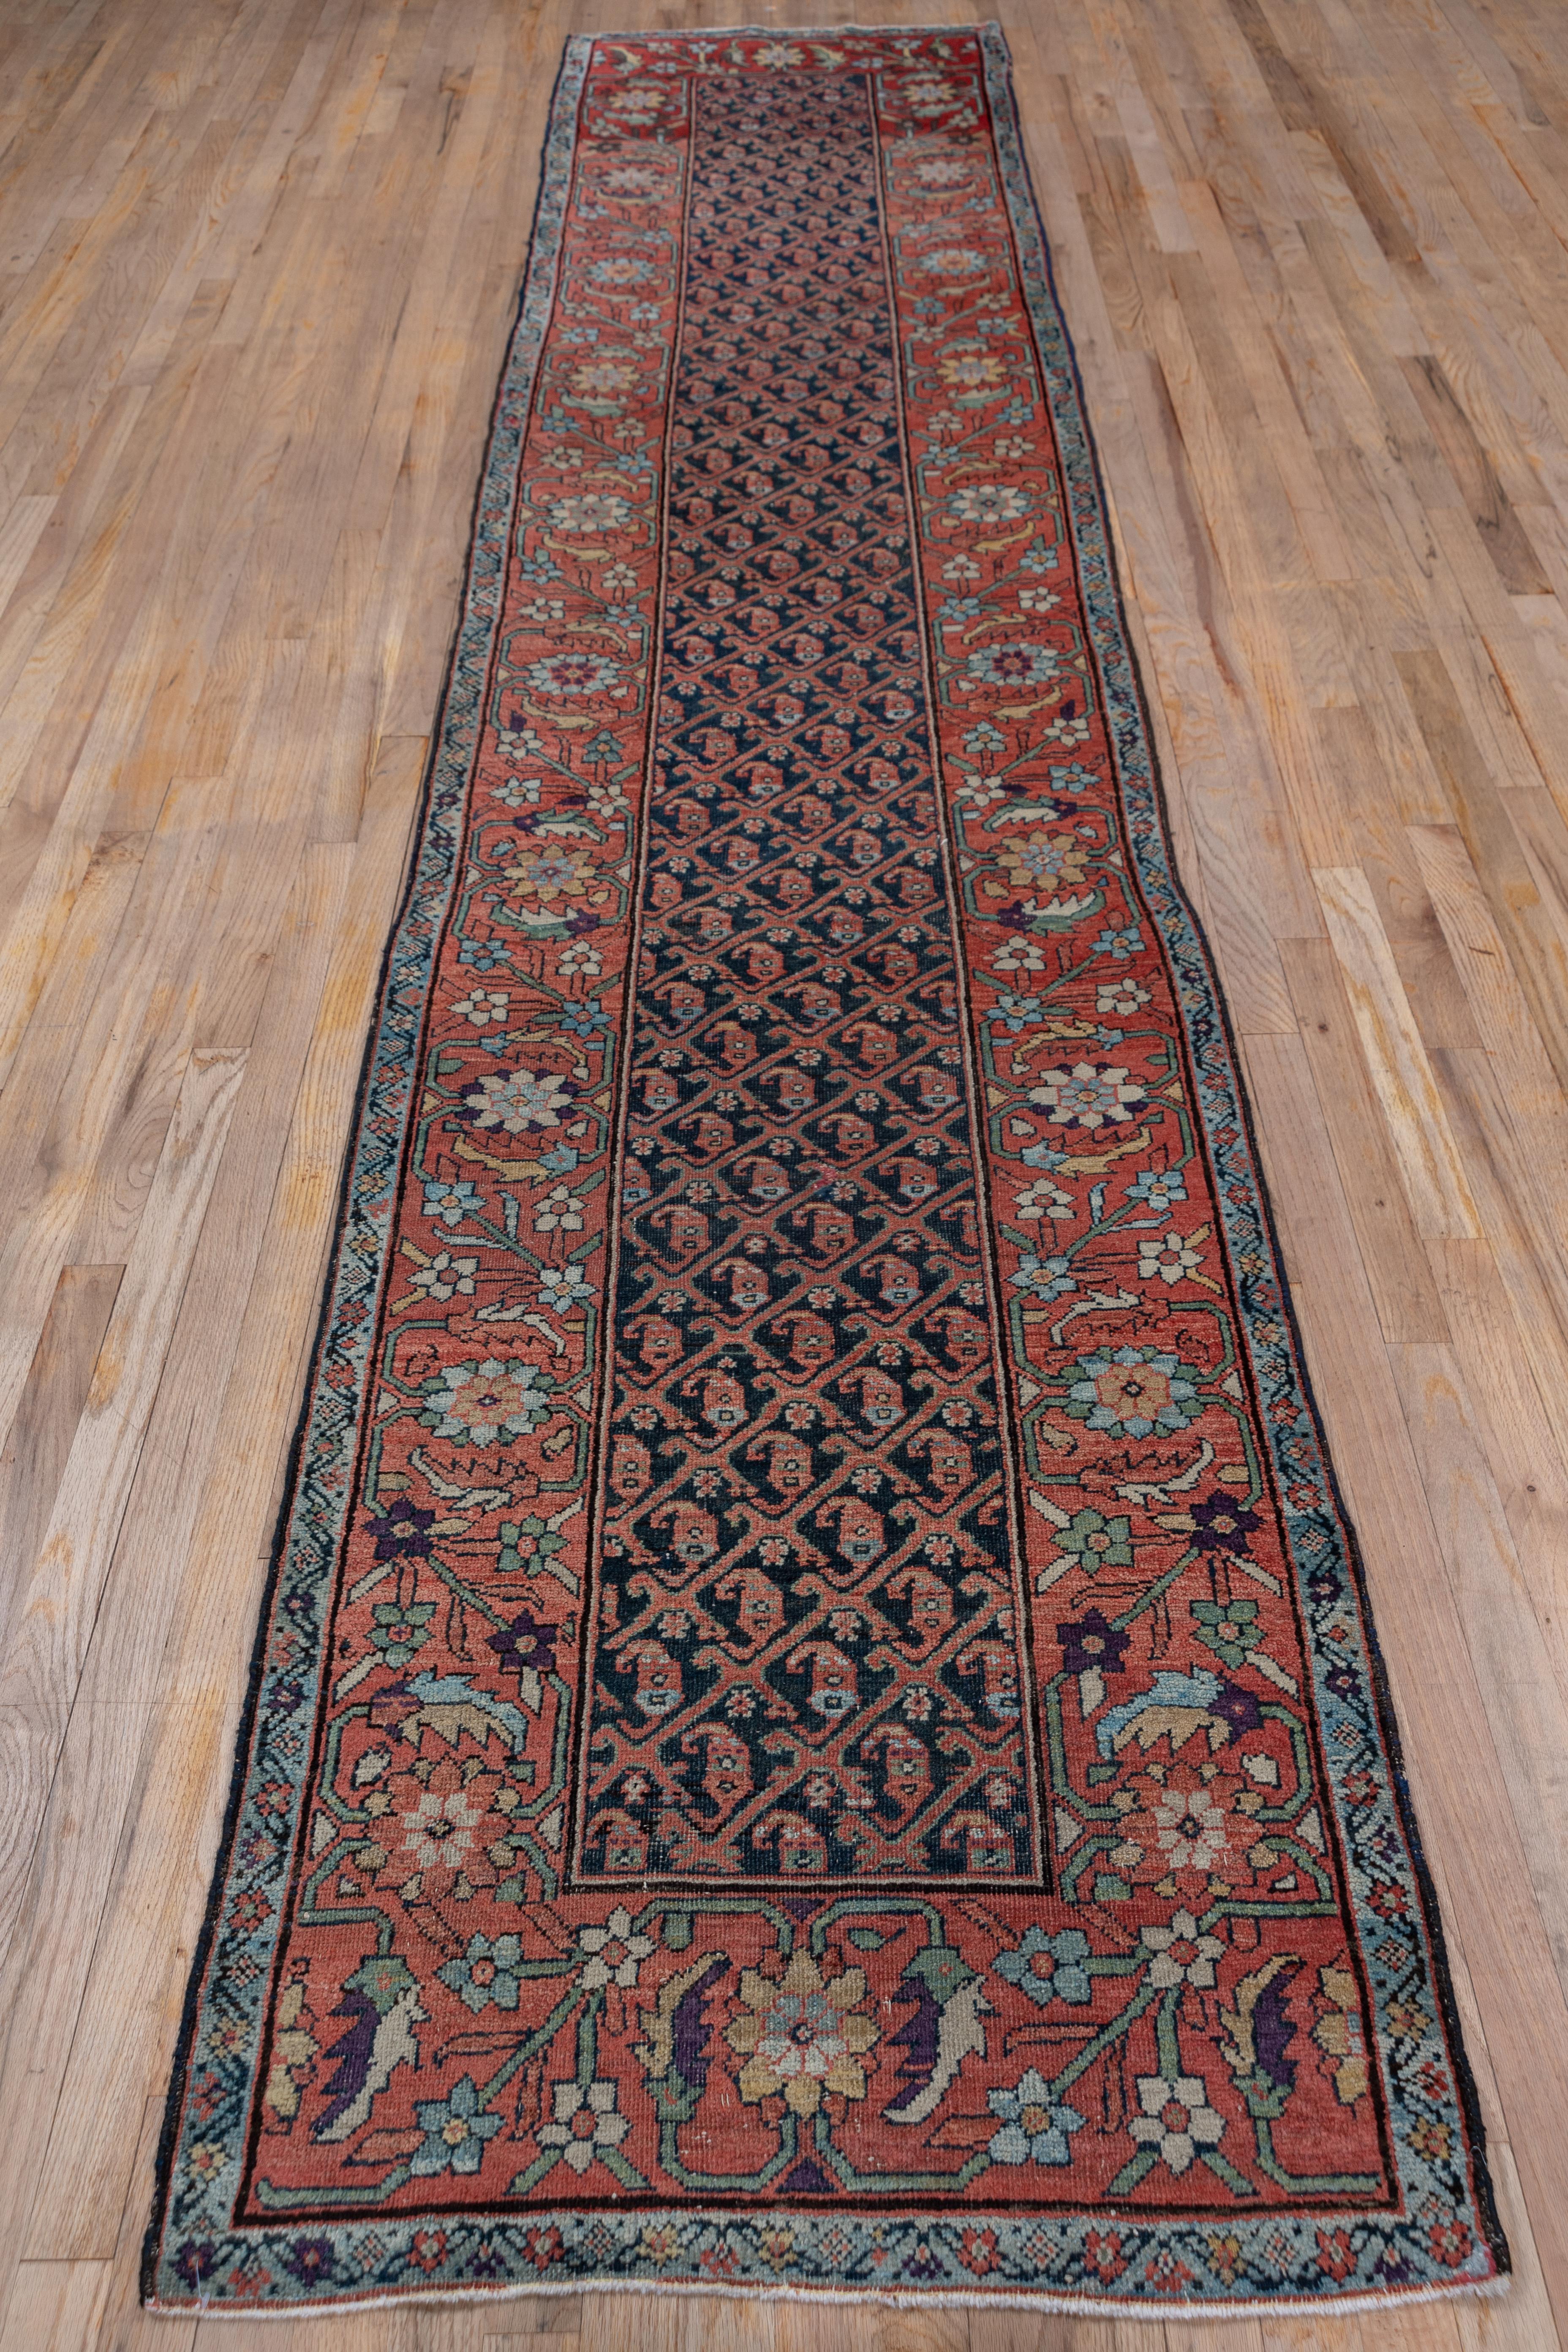 The field is somewhat ribbed on this interrupted lozenge lattice and botteh pattern west Persian runner. The charcoal field is detailed in soft terracotta and the bottehs all face to the left. The abrashed terracotta wide border displays the